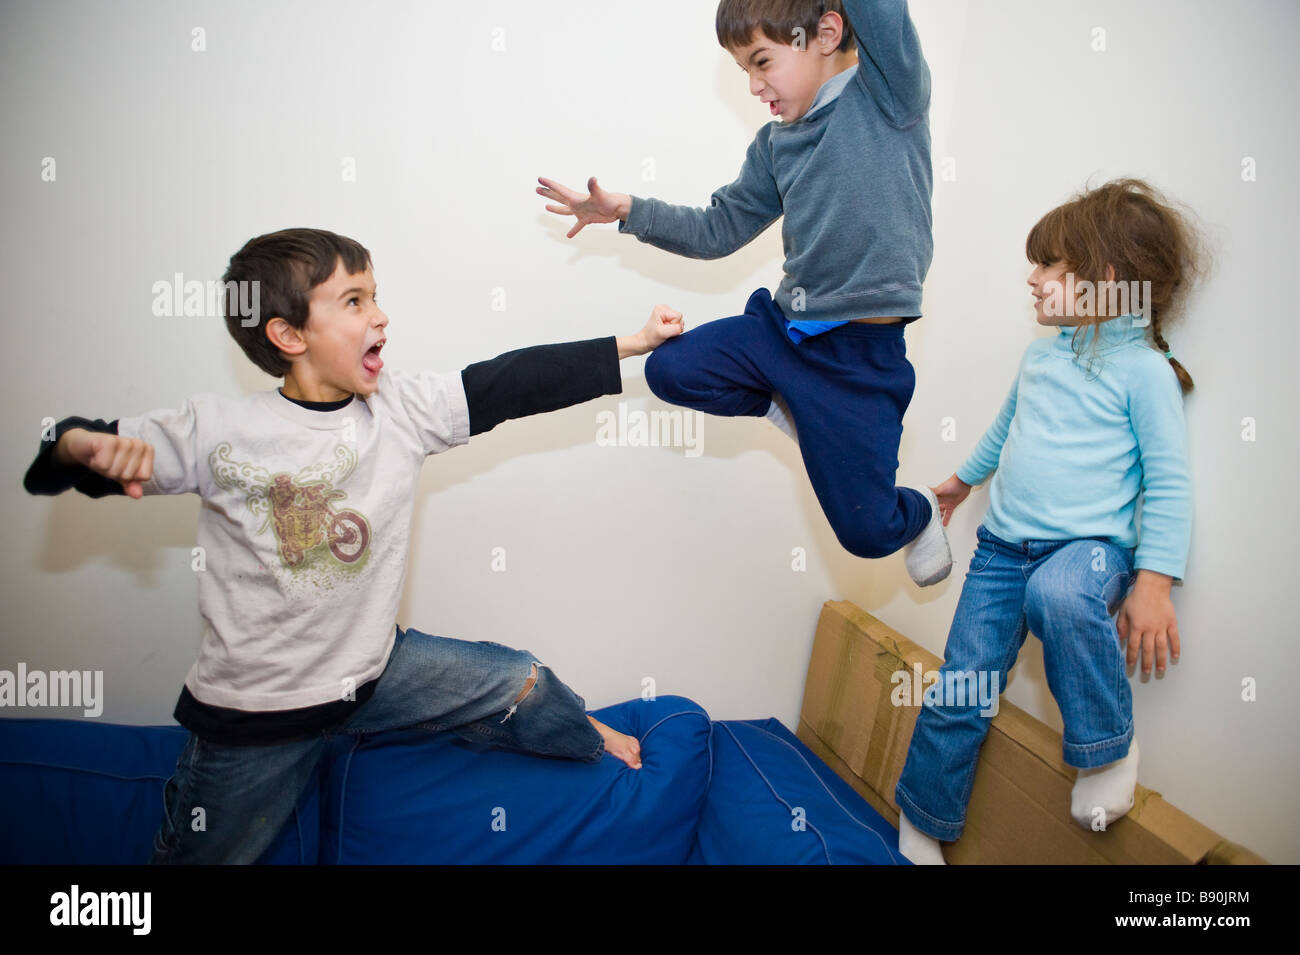 Male children play fighting on the sofa Stock Photo